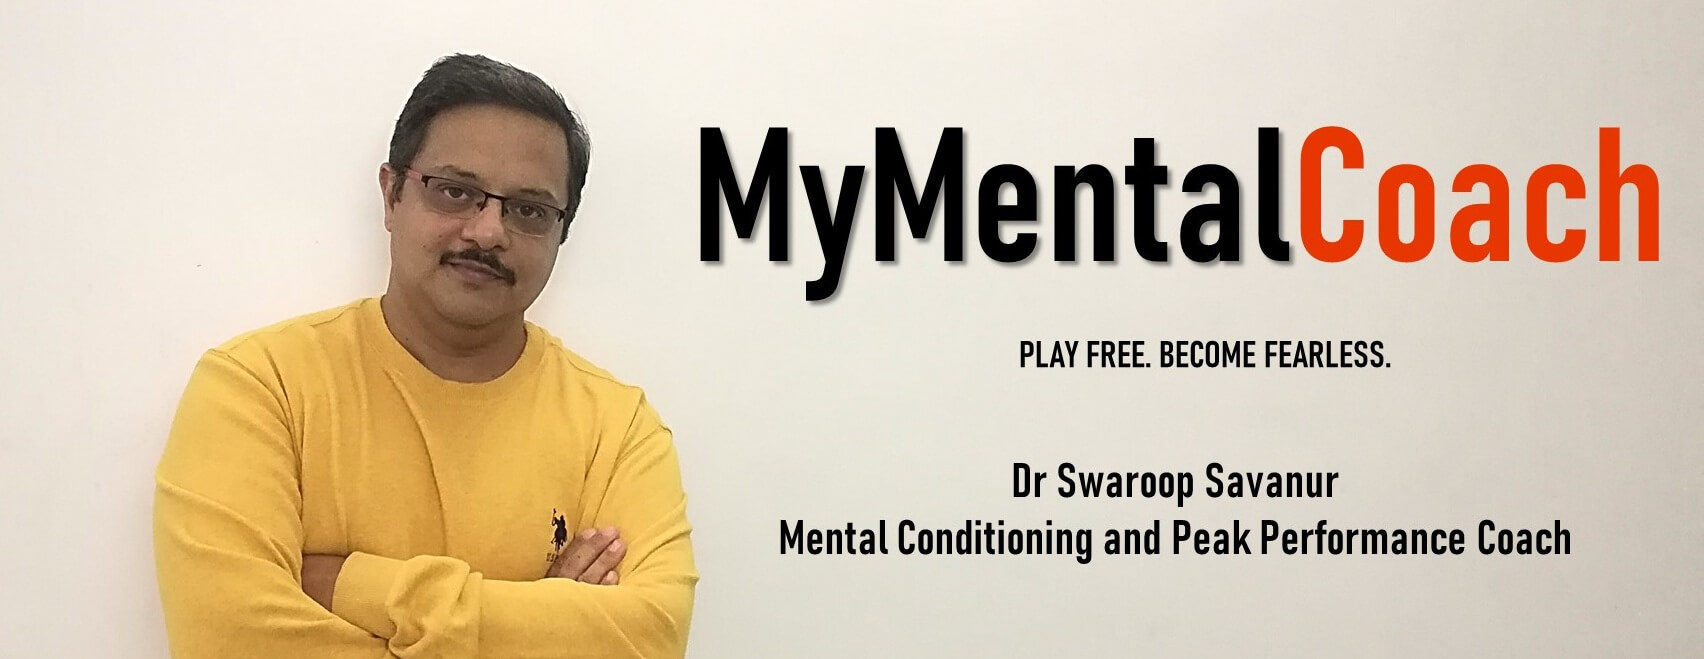 about MyMentalCoach